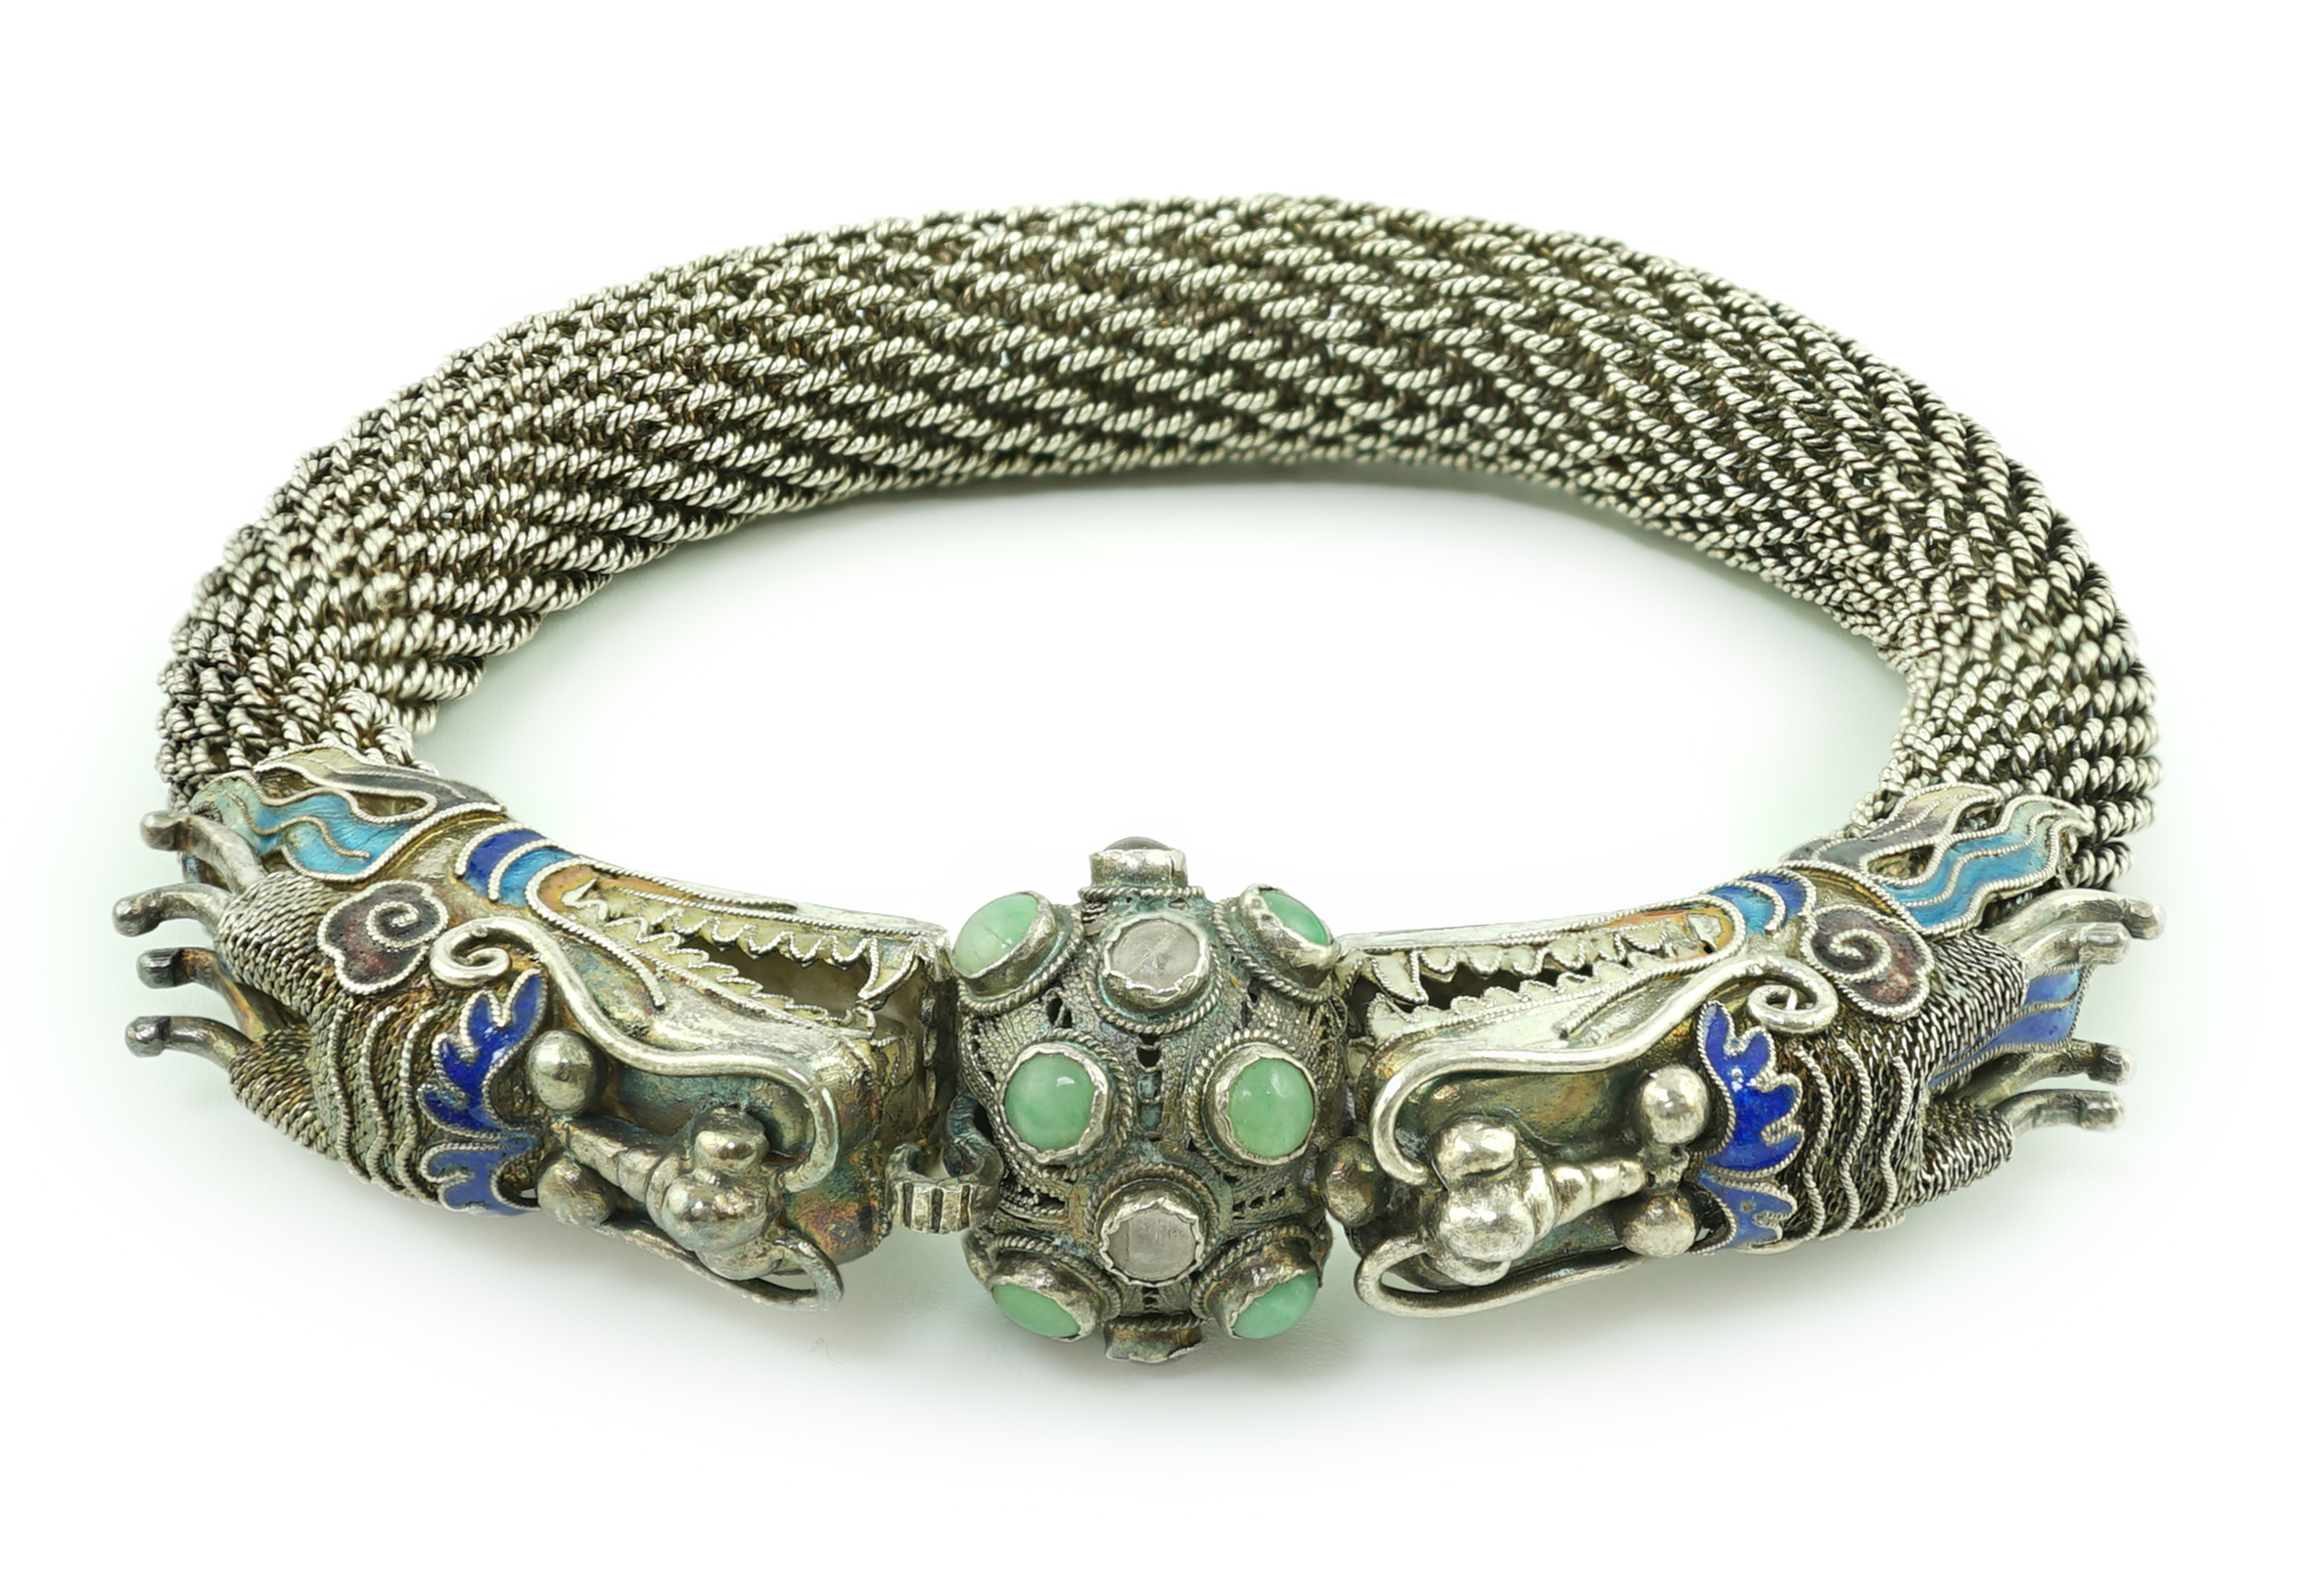 A Chinese silver, enamel and crystal 'dragon' bracelet, first half of 20th century